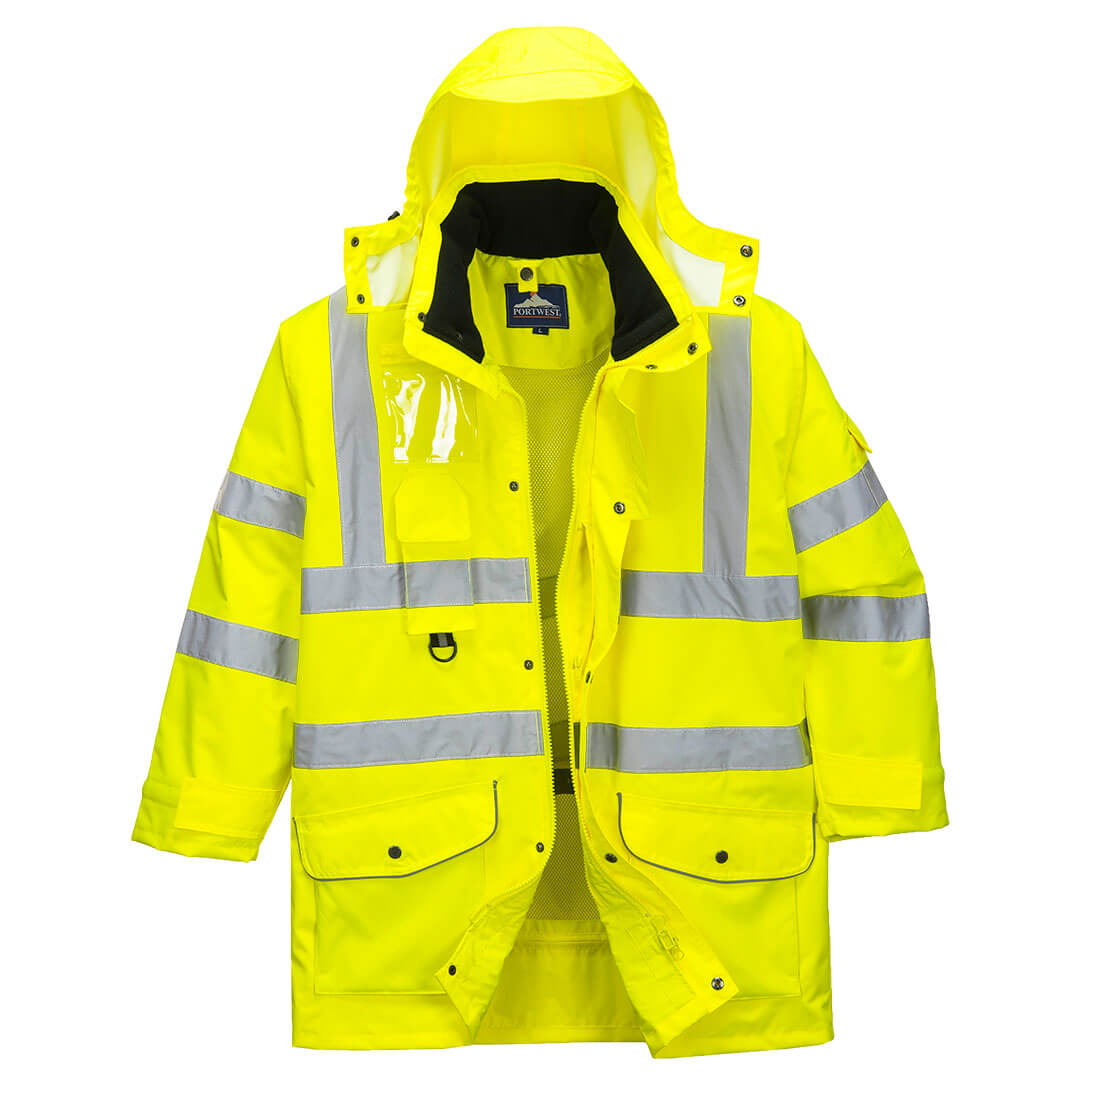 Image of Oxford Weave 300D Class 3 Hi Vis 7-in-1 Traffic Jacket Yellow 6XL